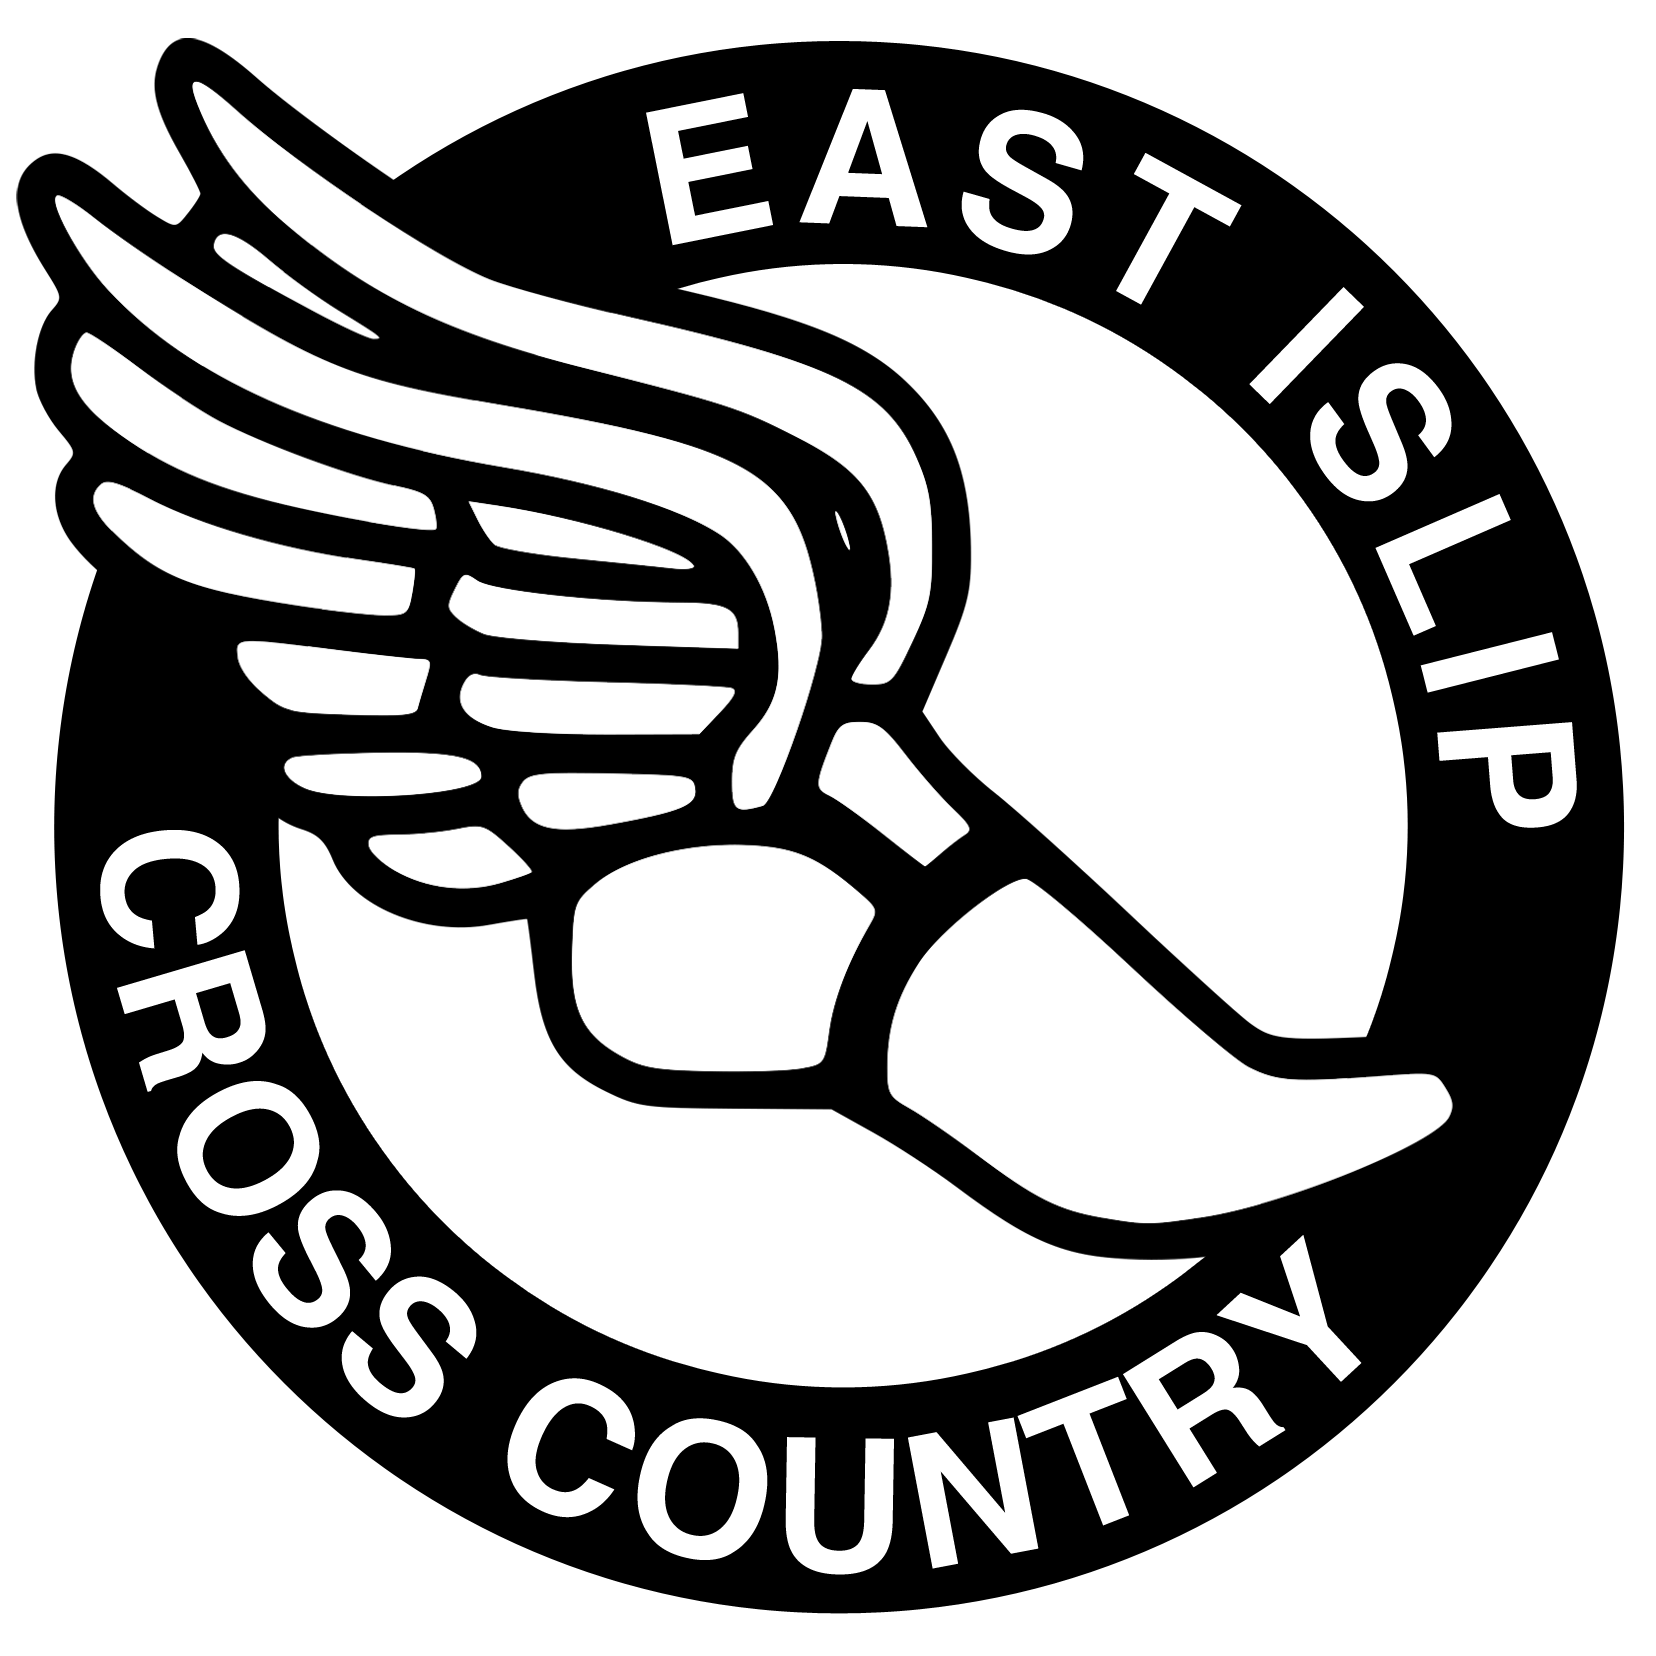 Cross Country Clipart - Cliparts.co